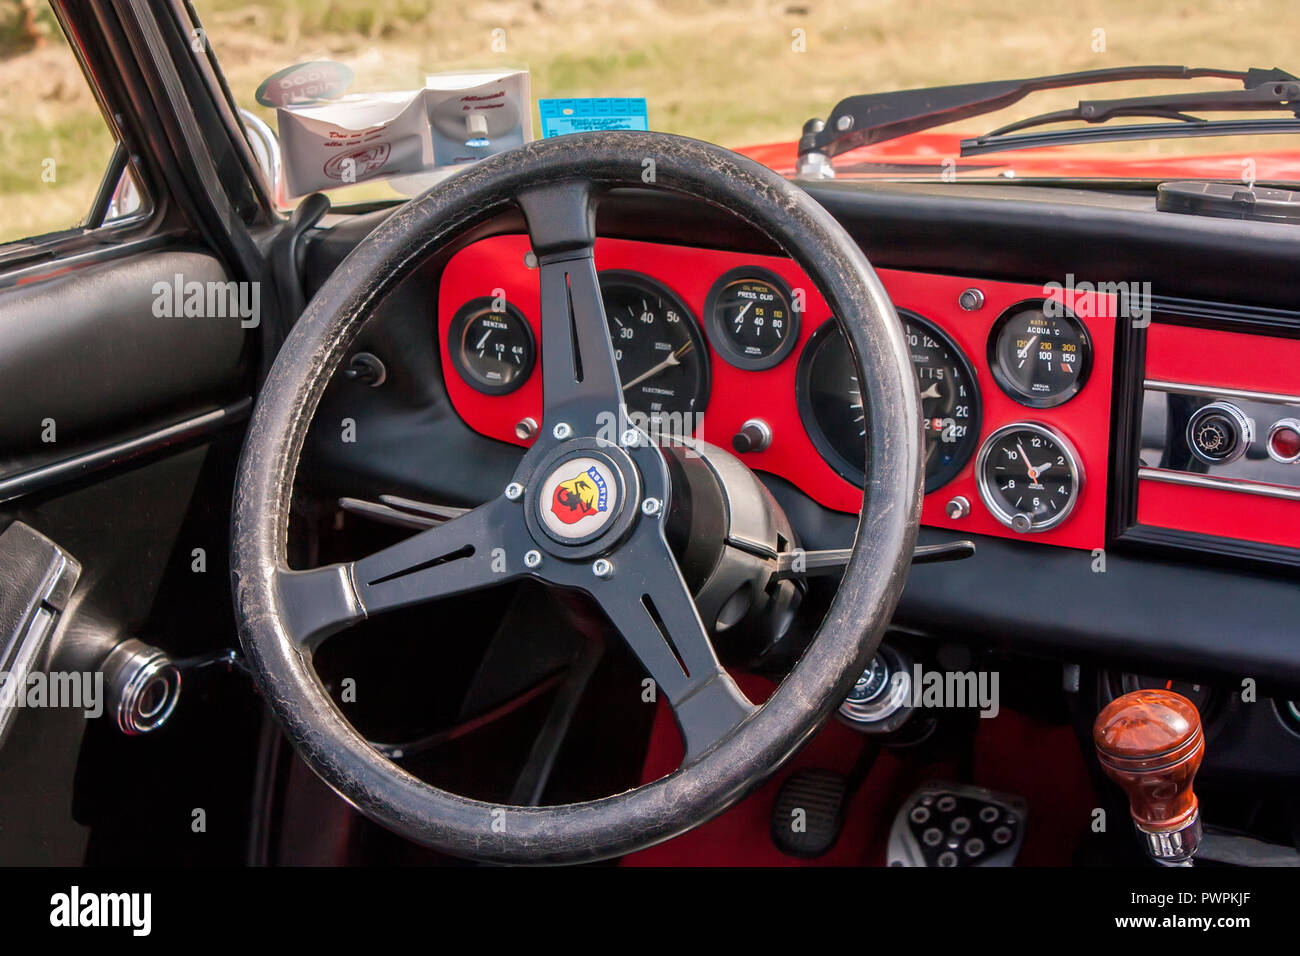 Interior Of A Fiat Abarth Historic Resumption Of The